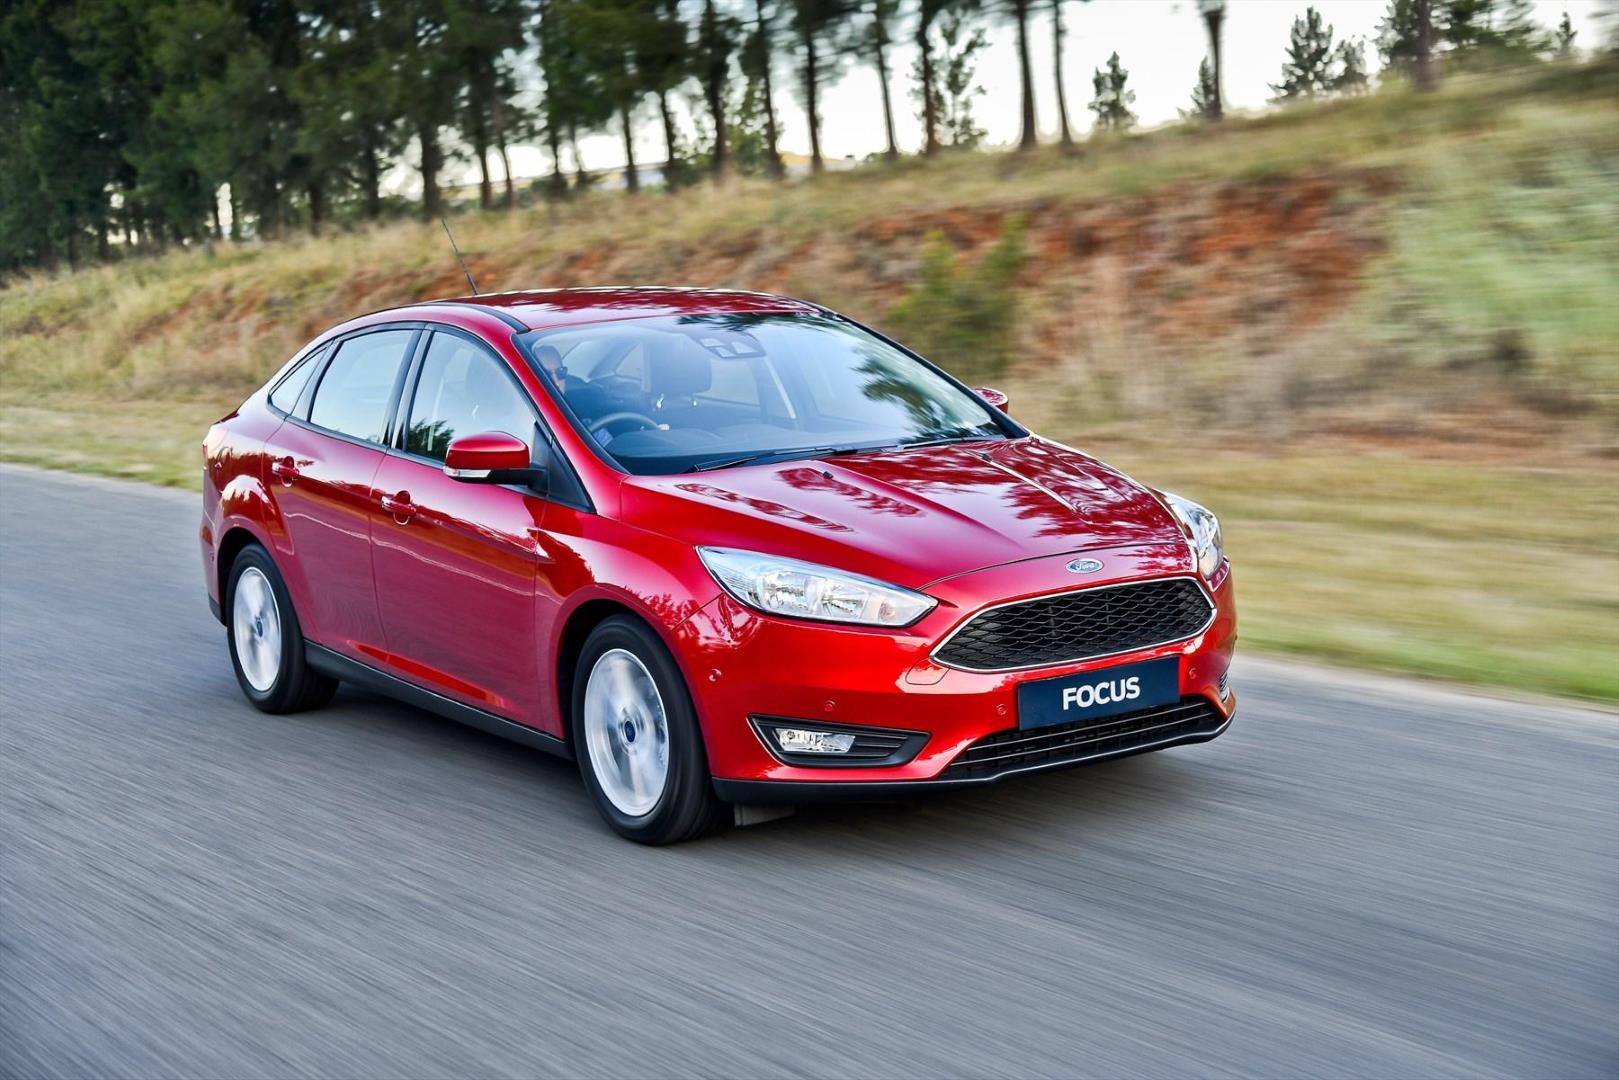 Ford Focus Range gains Four New 1.0 EcoBoost PowerShift